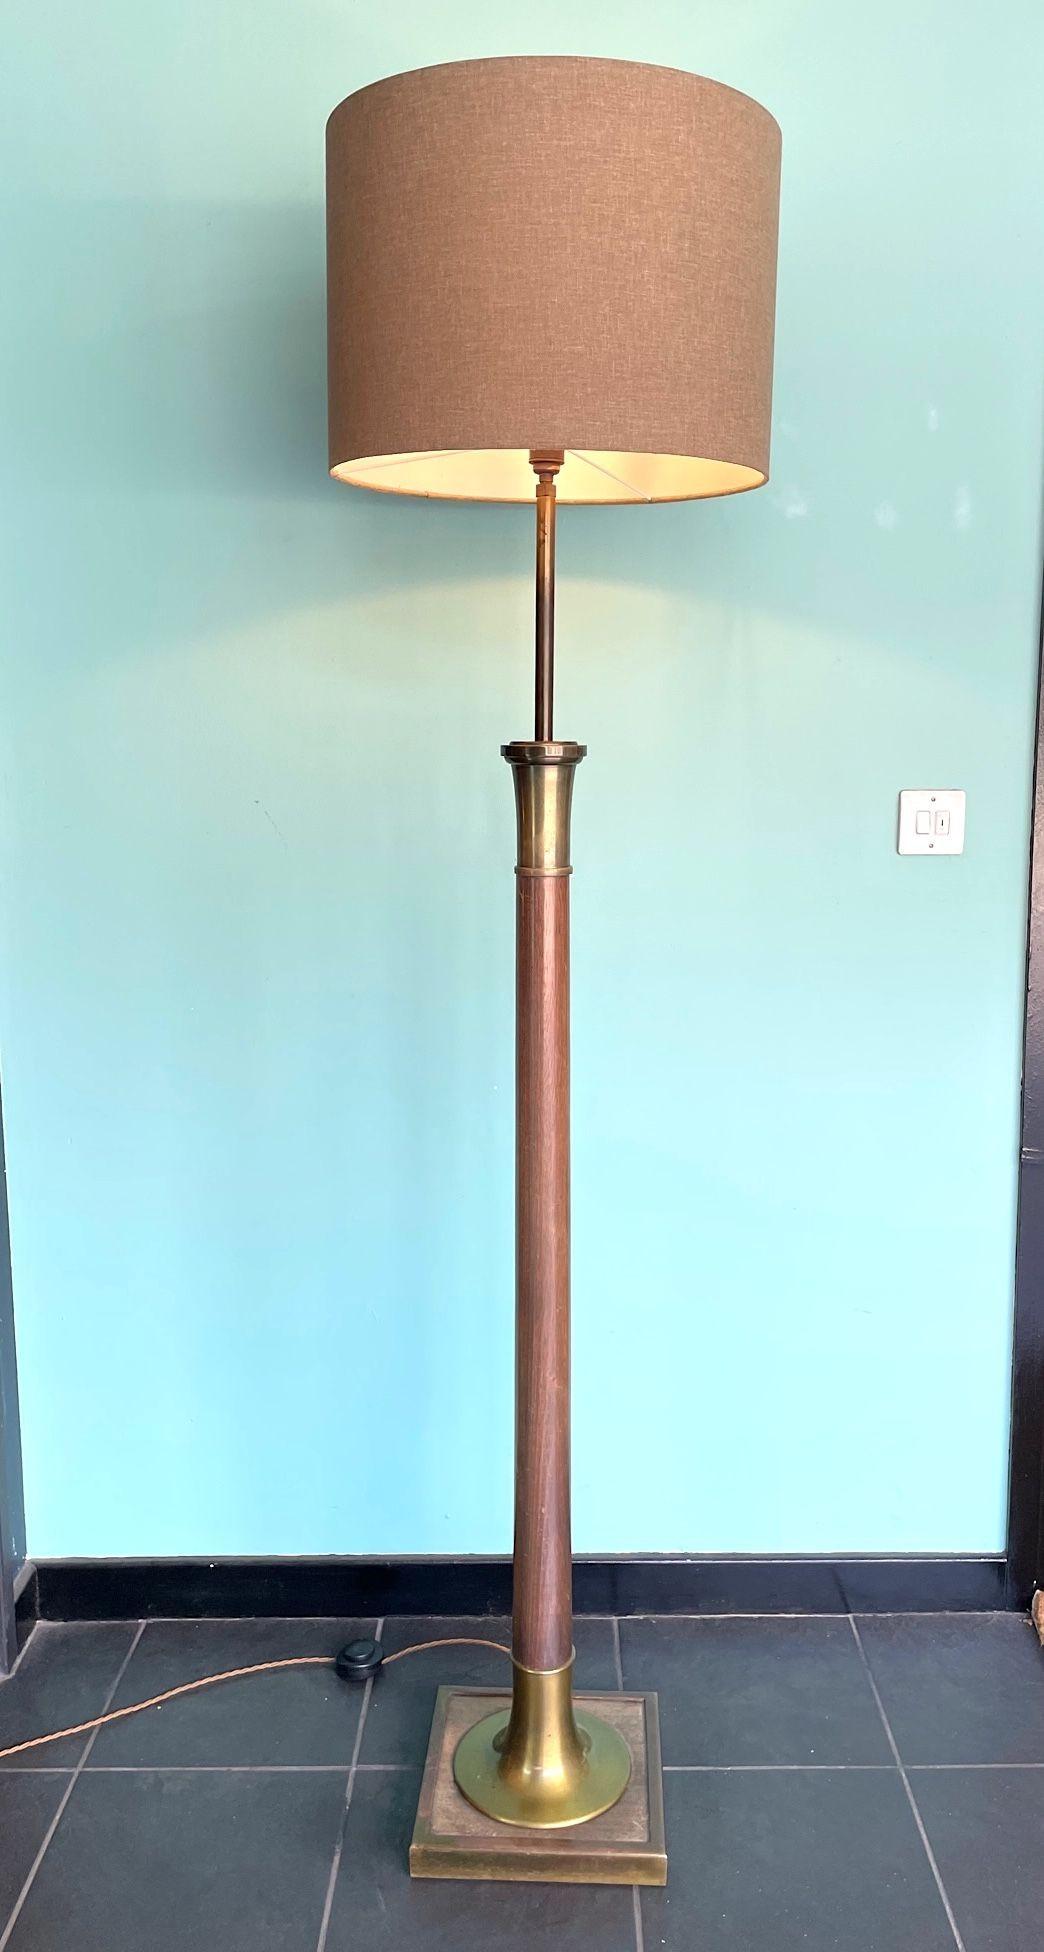 A large 1950s Spanish wooden and brass floor lamp re wired with new brass fittings, antique gold cord flex and foot switch. With new bespoke natural linen drum shade.